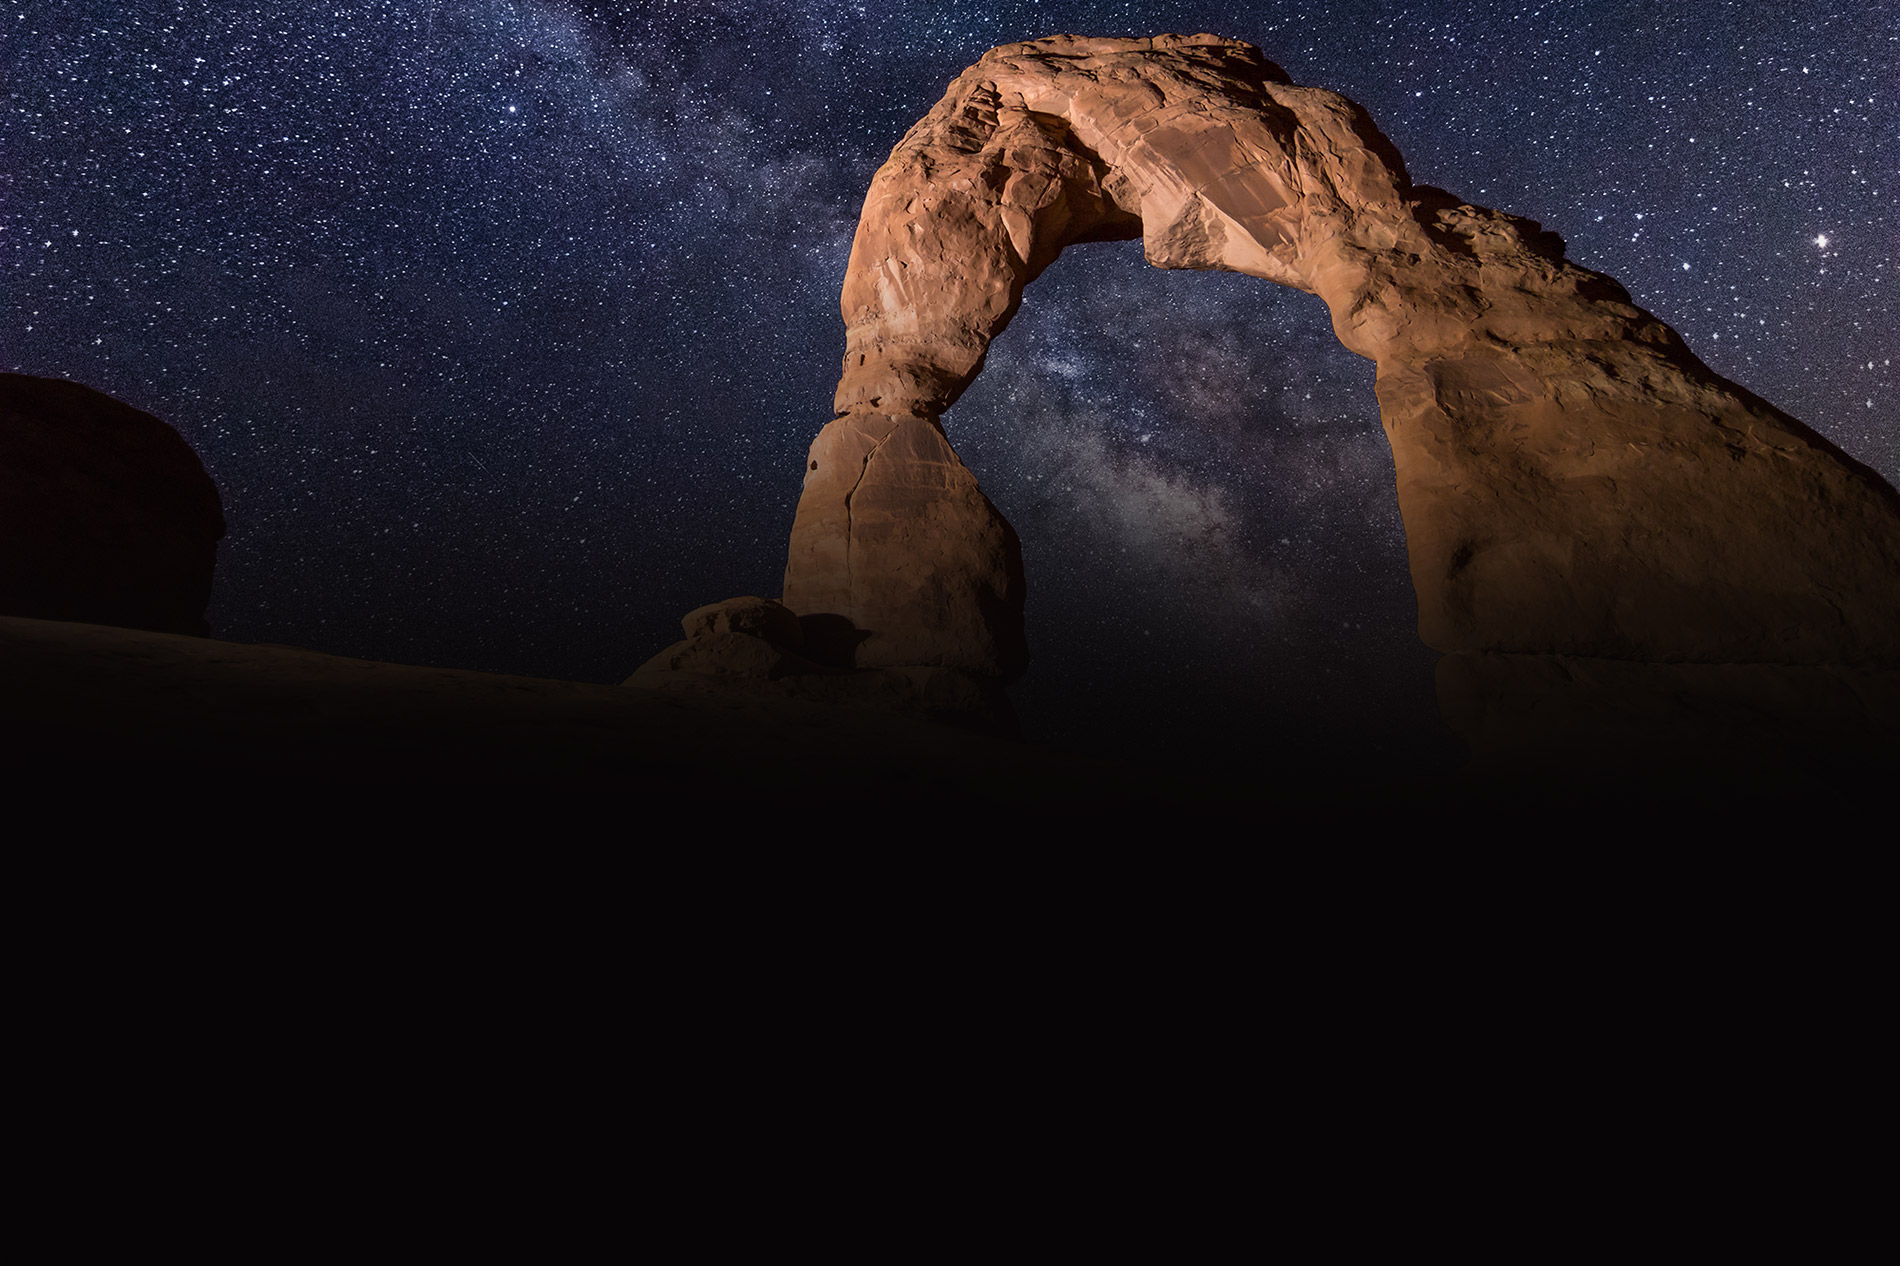 Orion rising over Delicate Arch image